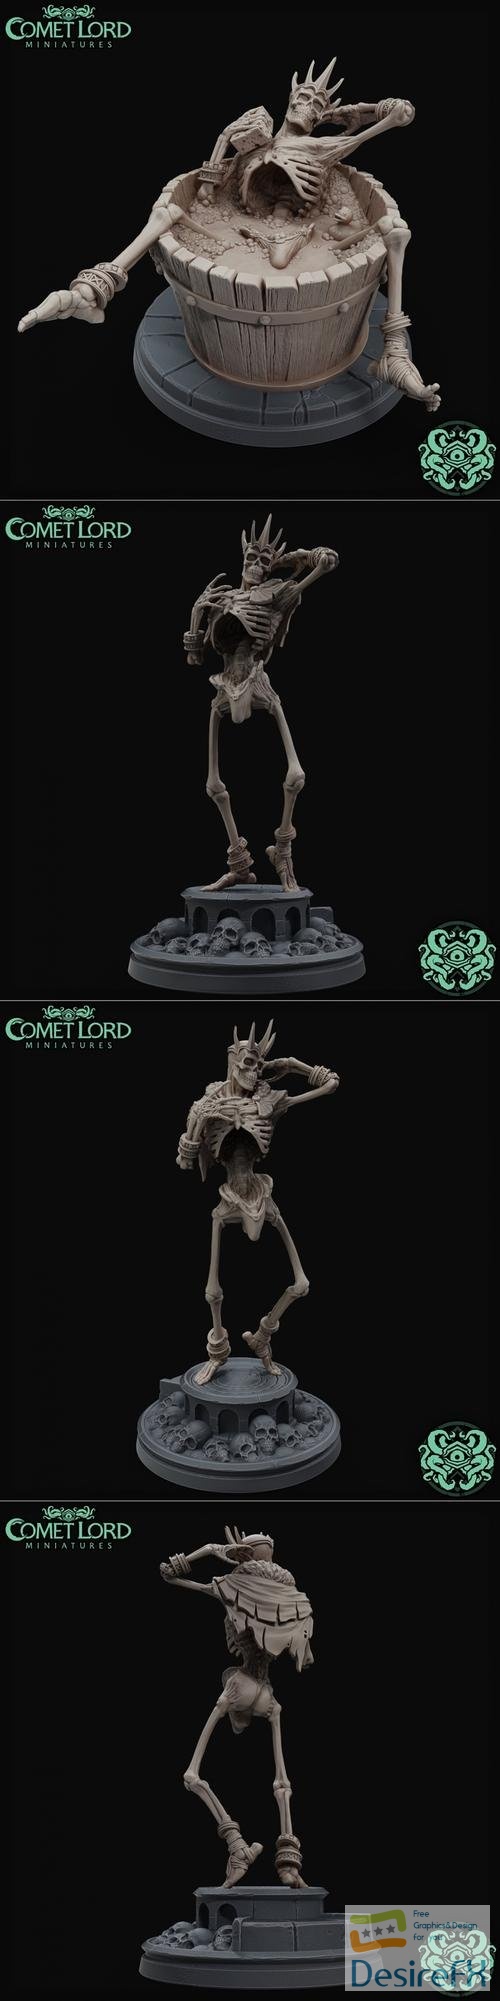 Comet Lord Miniatures - Stupid Sexy Lich – 3D Print